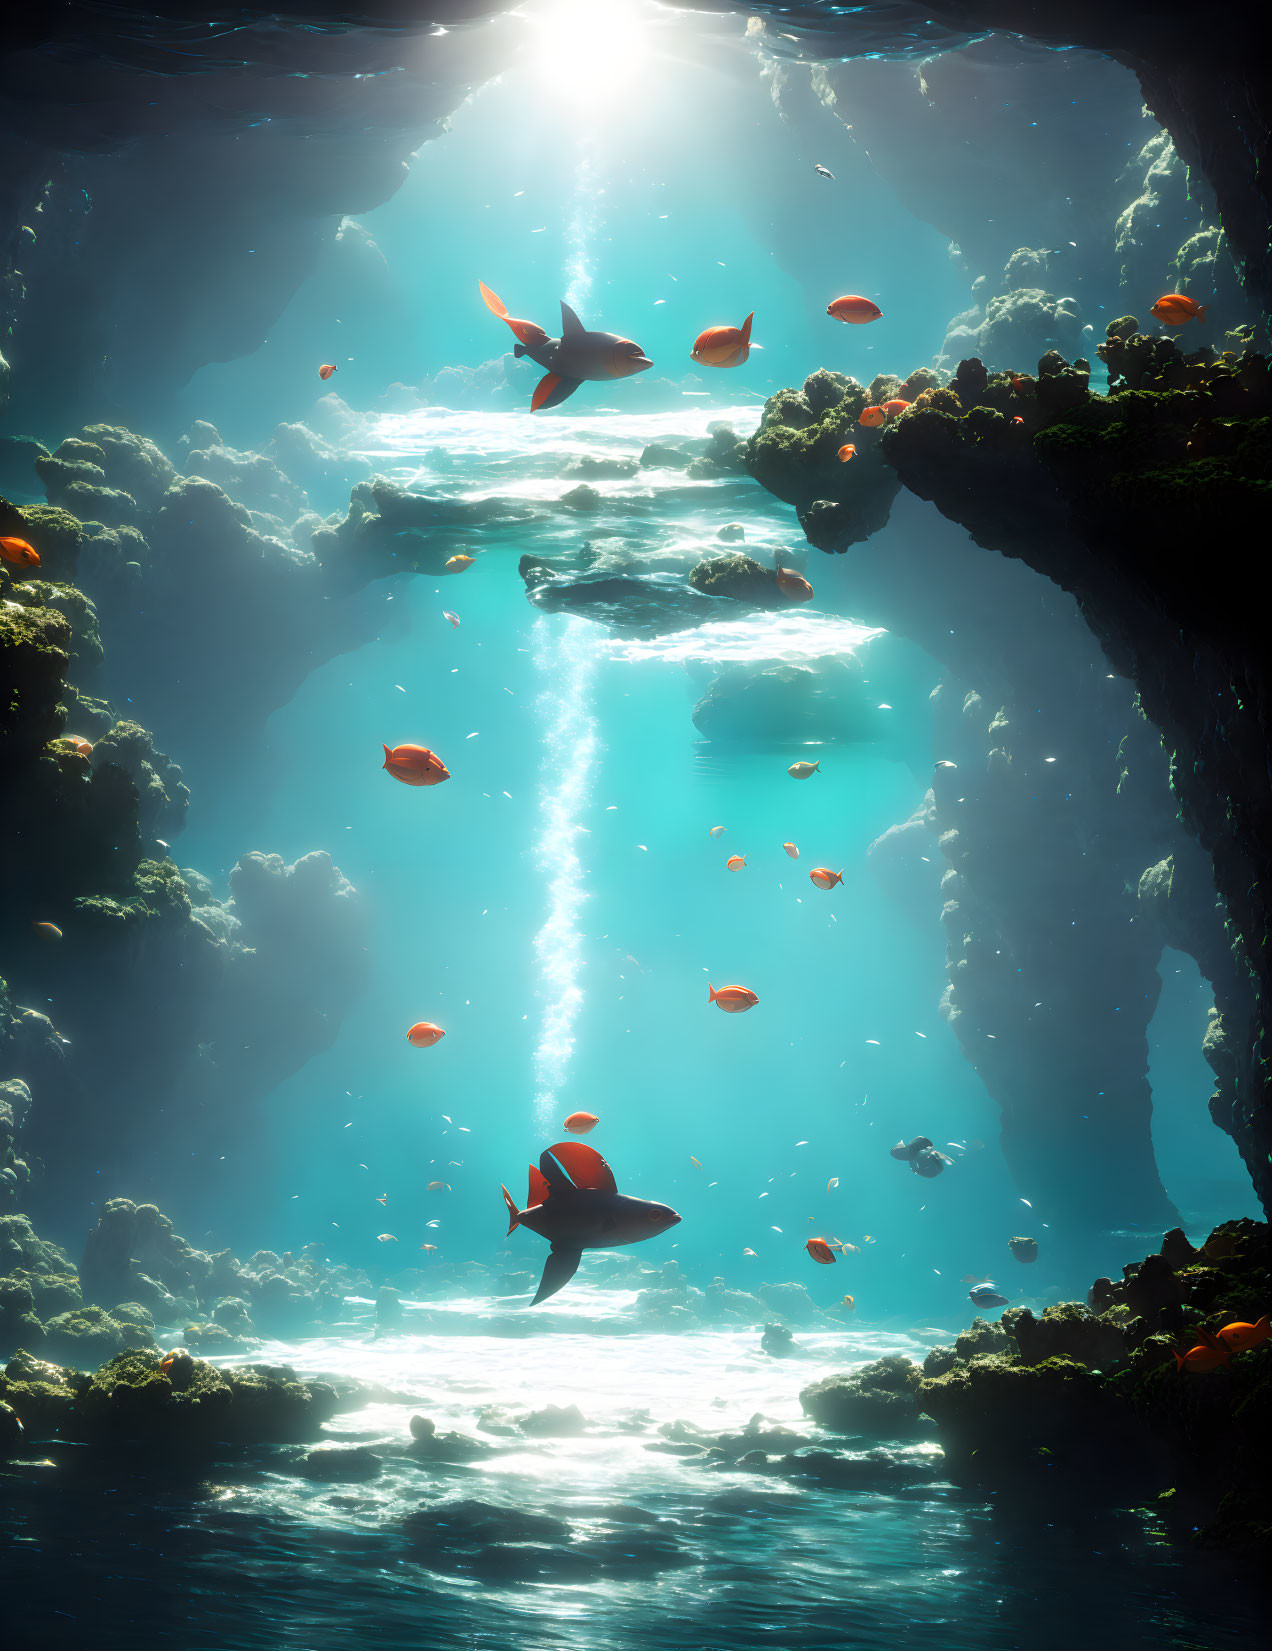 Tranquil Underwater Scene with Sunlight, Fish, Rocks, and Aquatic Plants